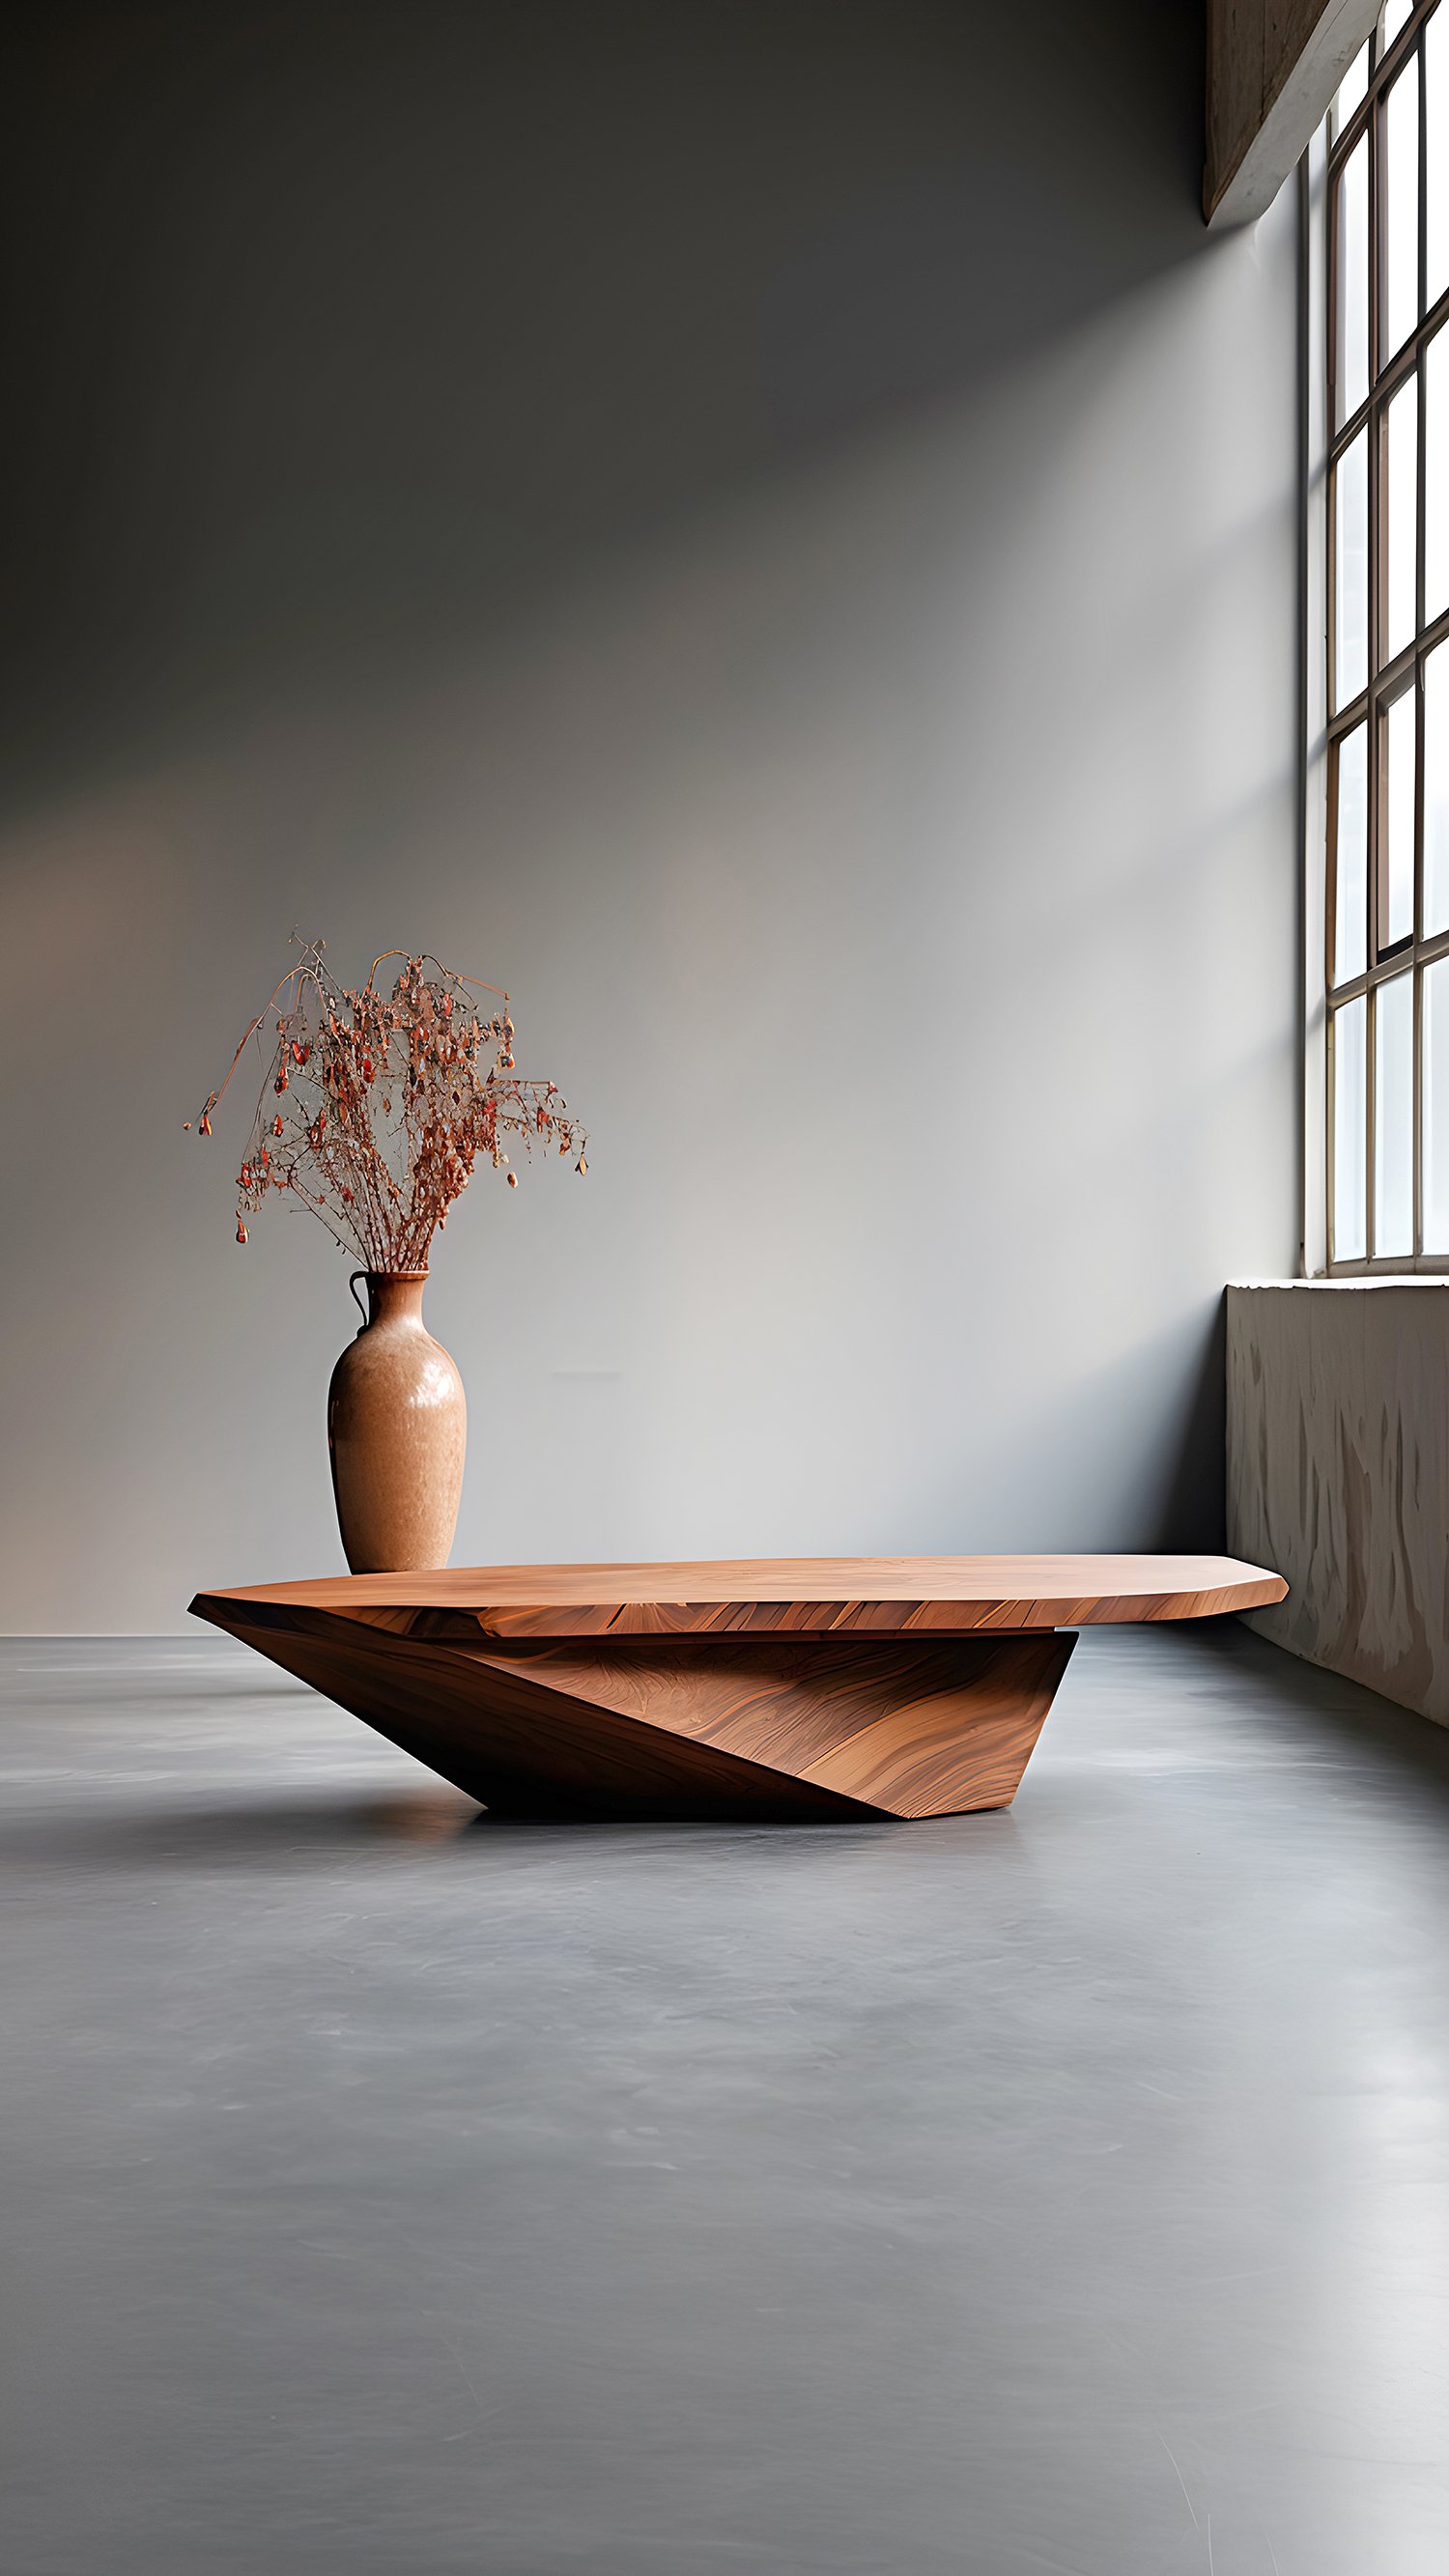 Sculptural Coffee Table Made of Solid Wood, Center Table Solace S24 by Joel Escalona — 7.jpg